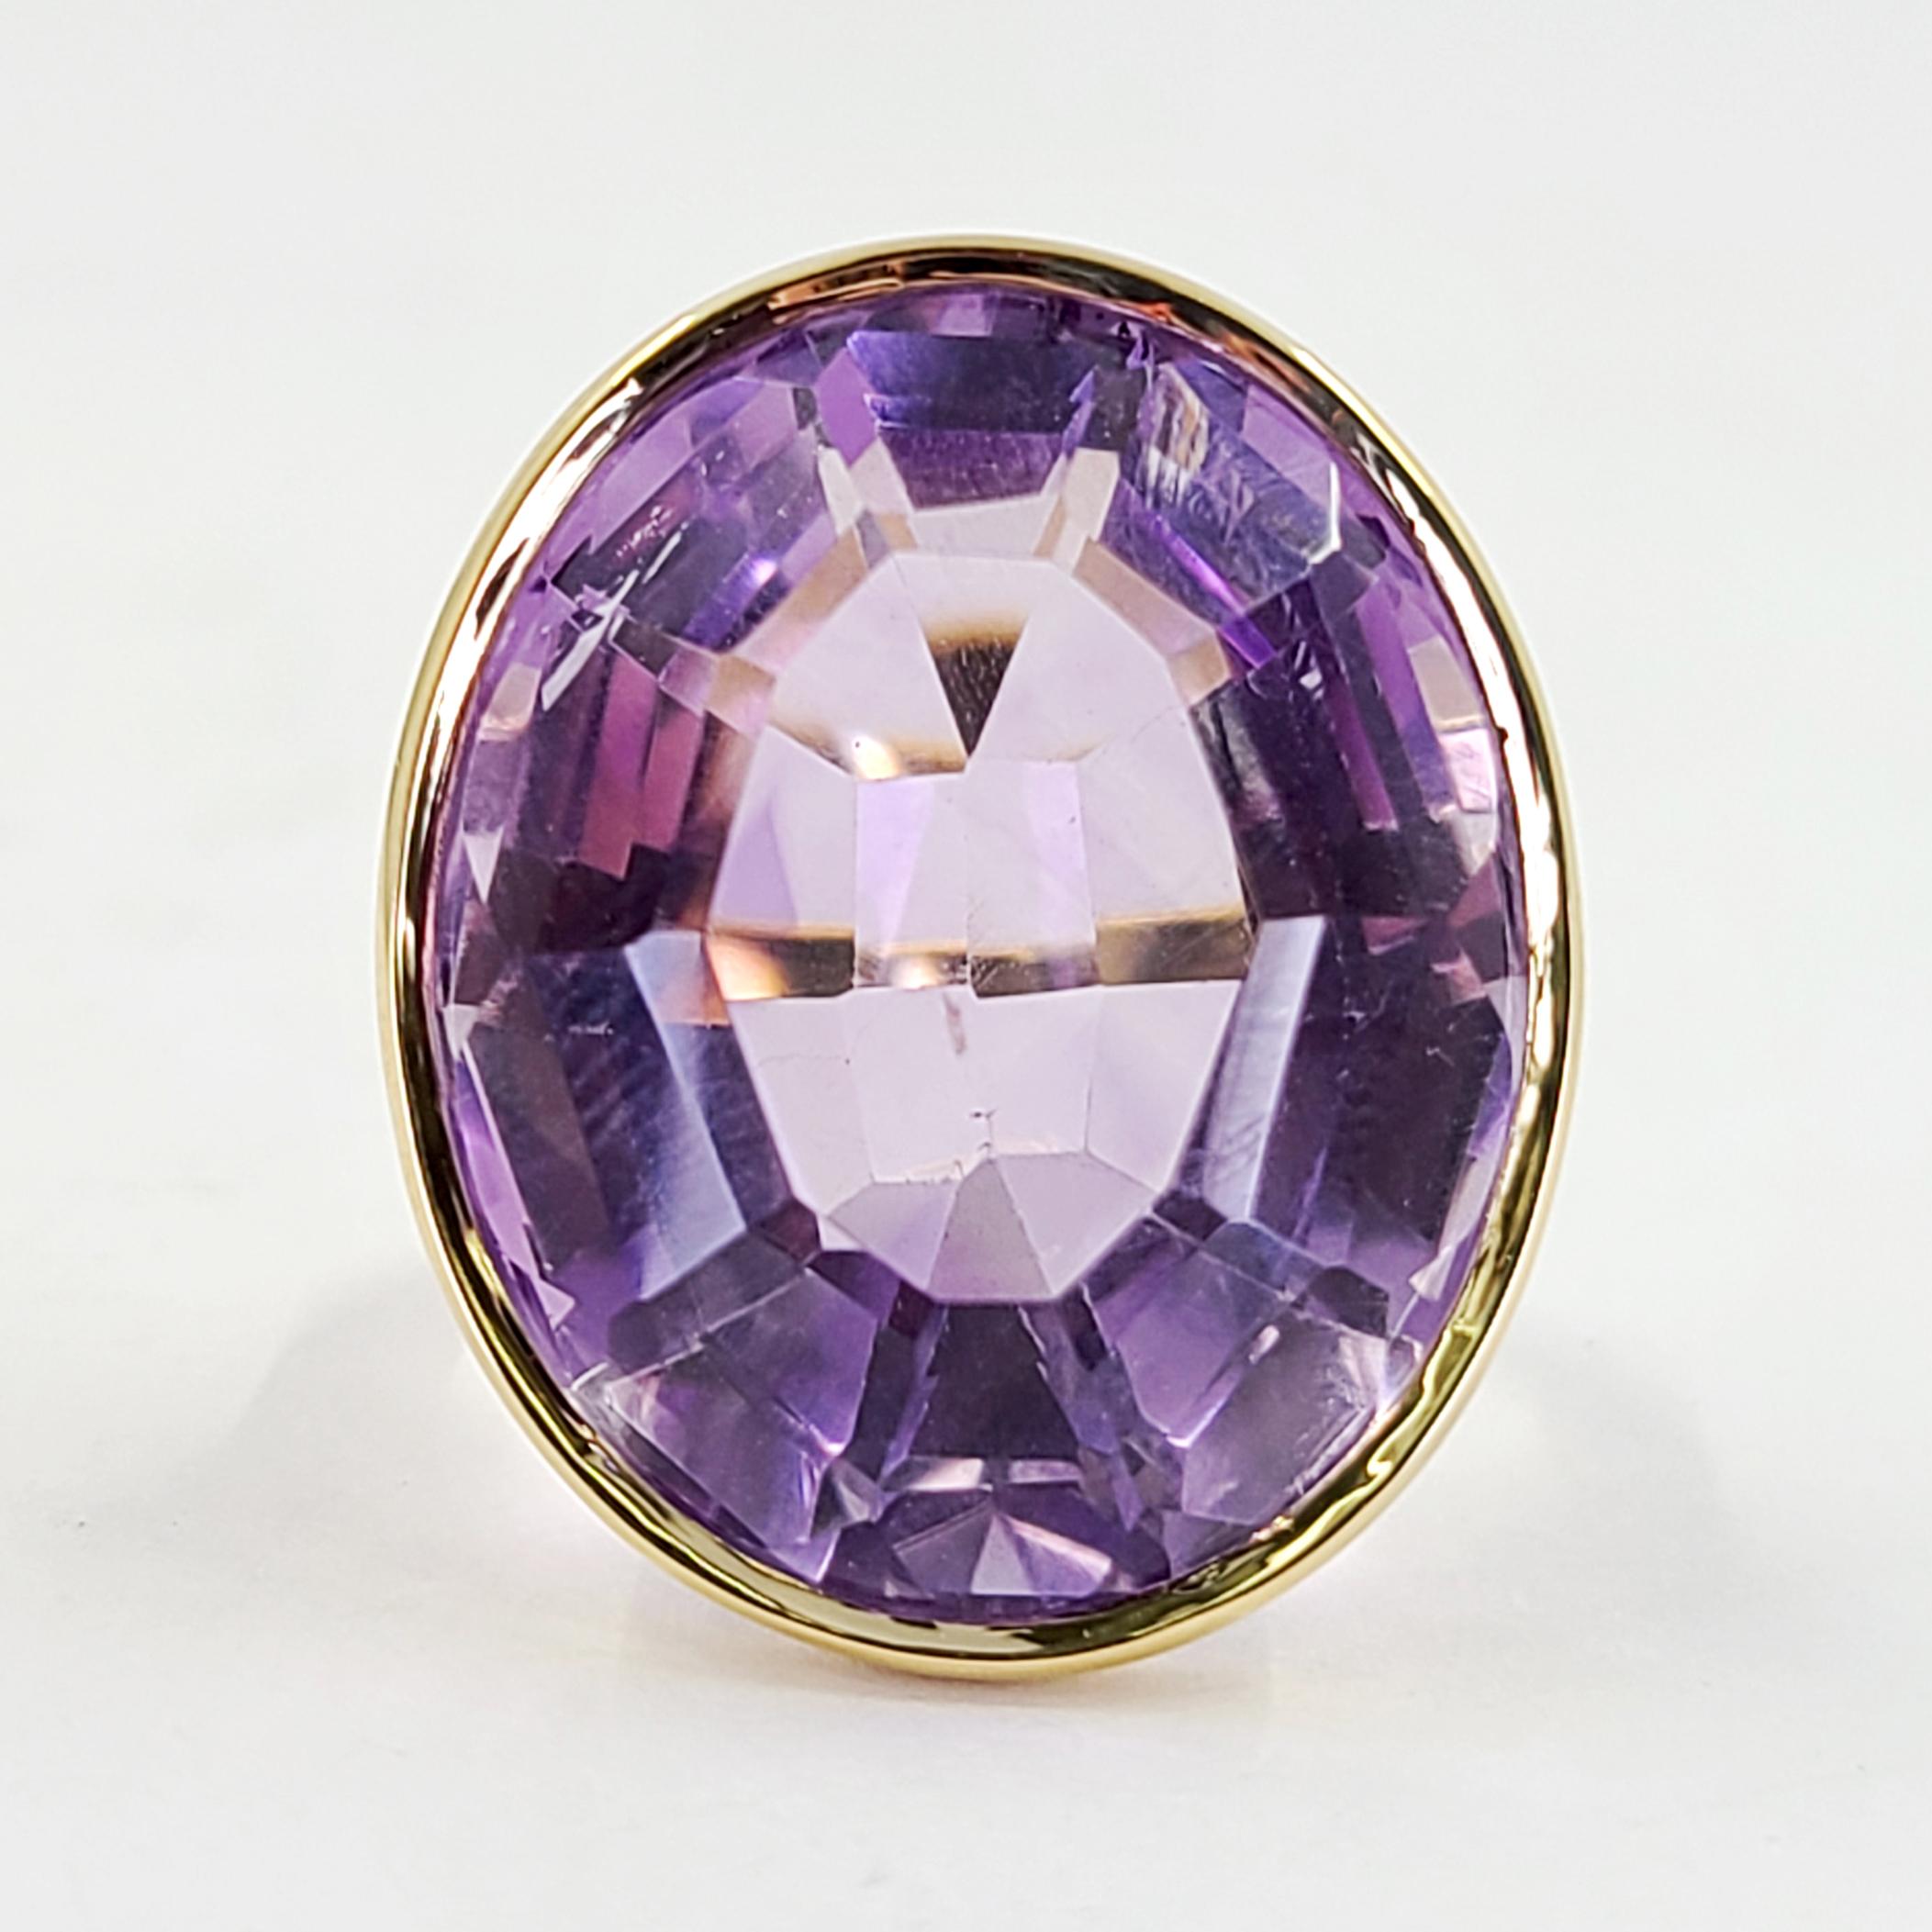 18 Karat Yellow Gold Cocktail Ring Featuring A 35 Carat Bezel Set Oval Amethyst. Finger Size 5; Purchase Includes One Sizing Service. Finished Weight Is 13.7 Grams.